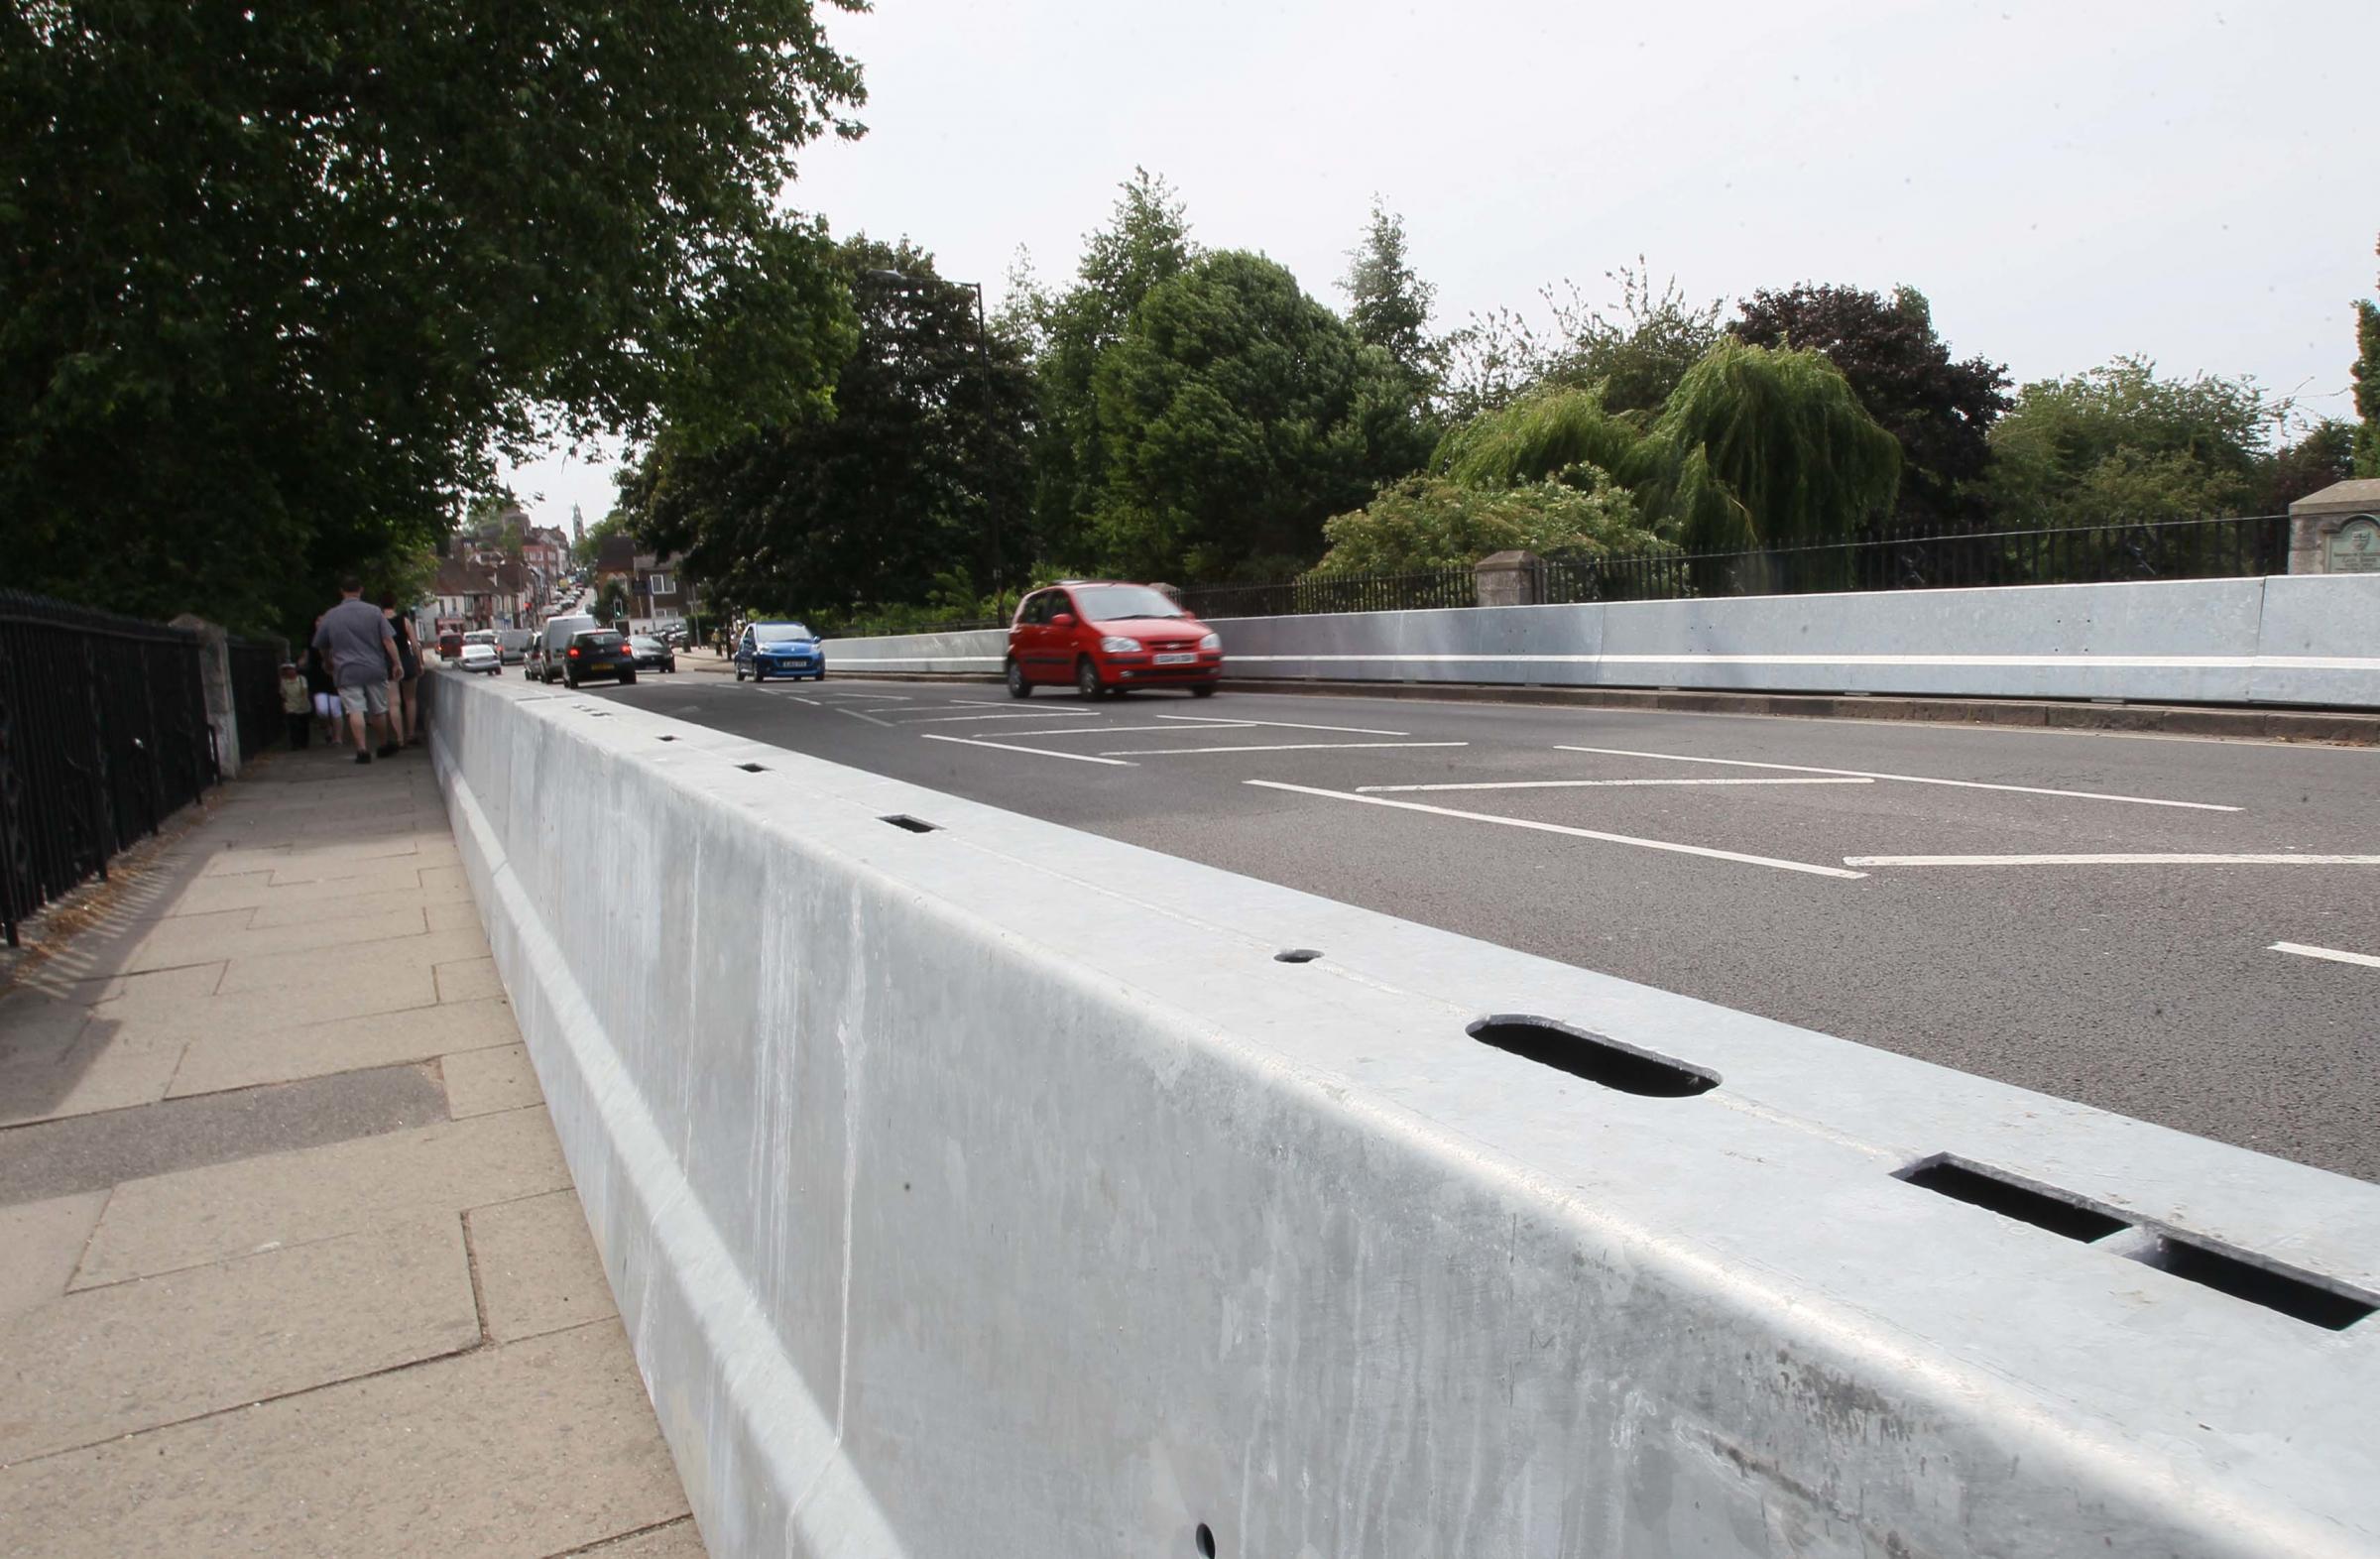 Letter: 'Netflix want to use the craters on East Bridge'